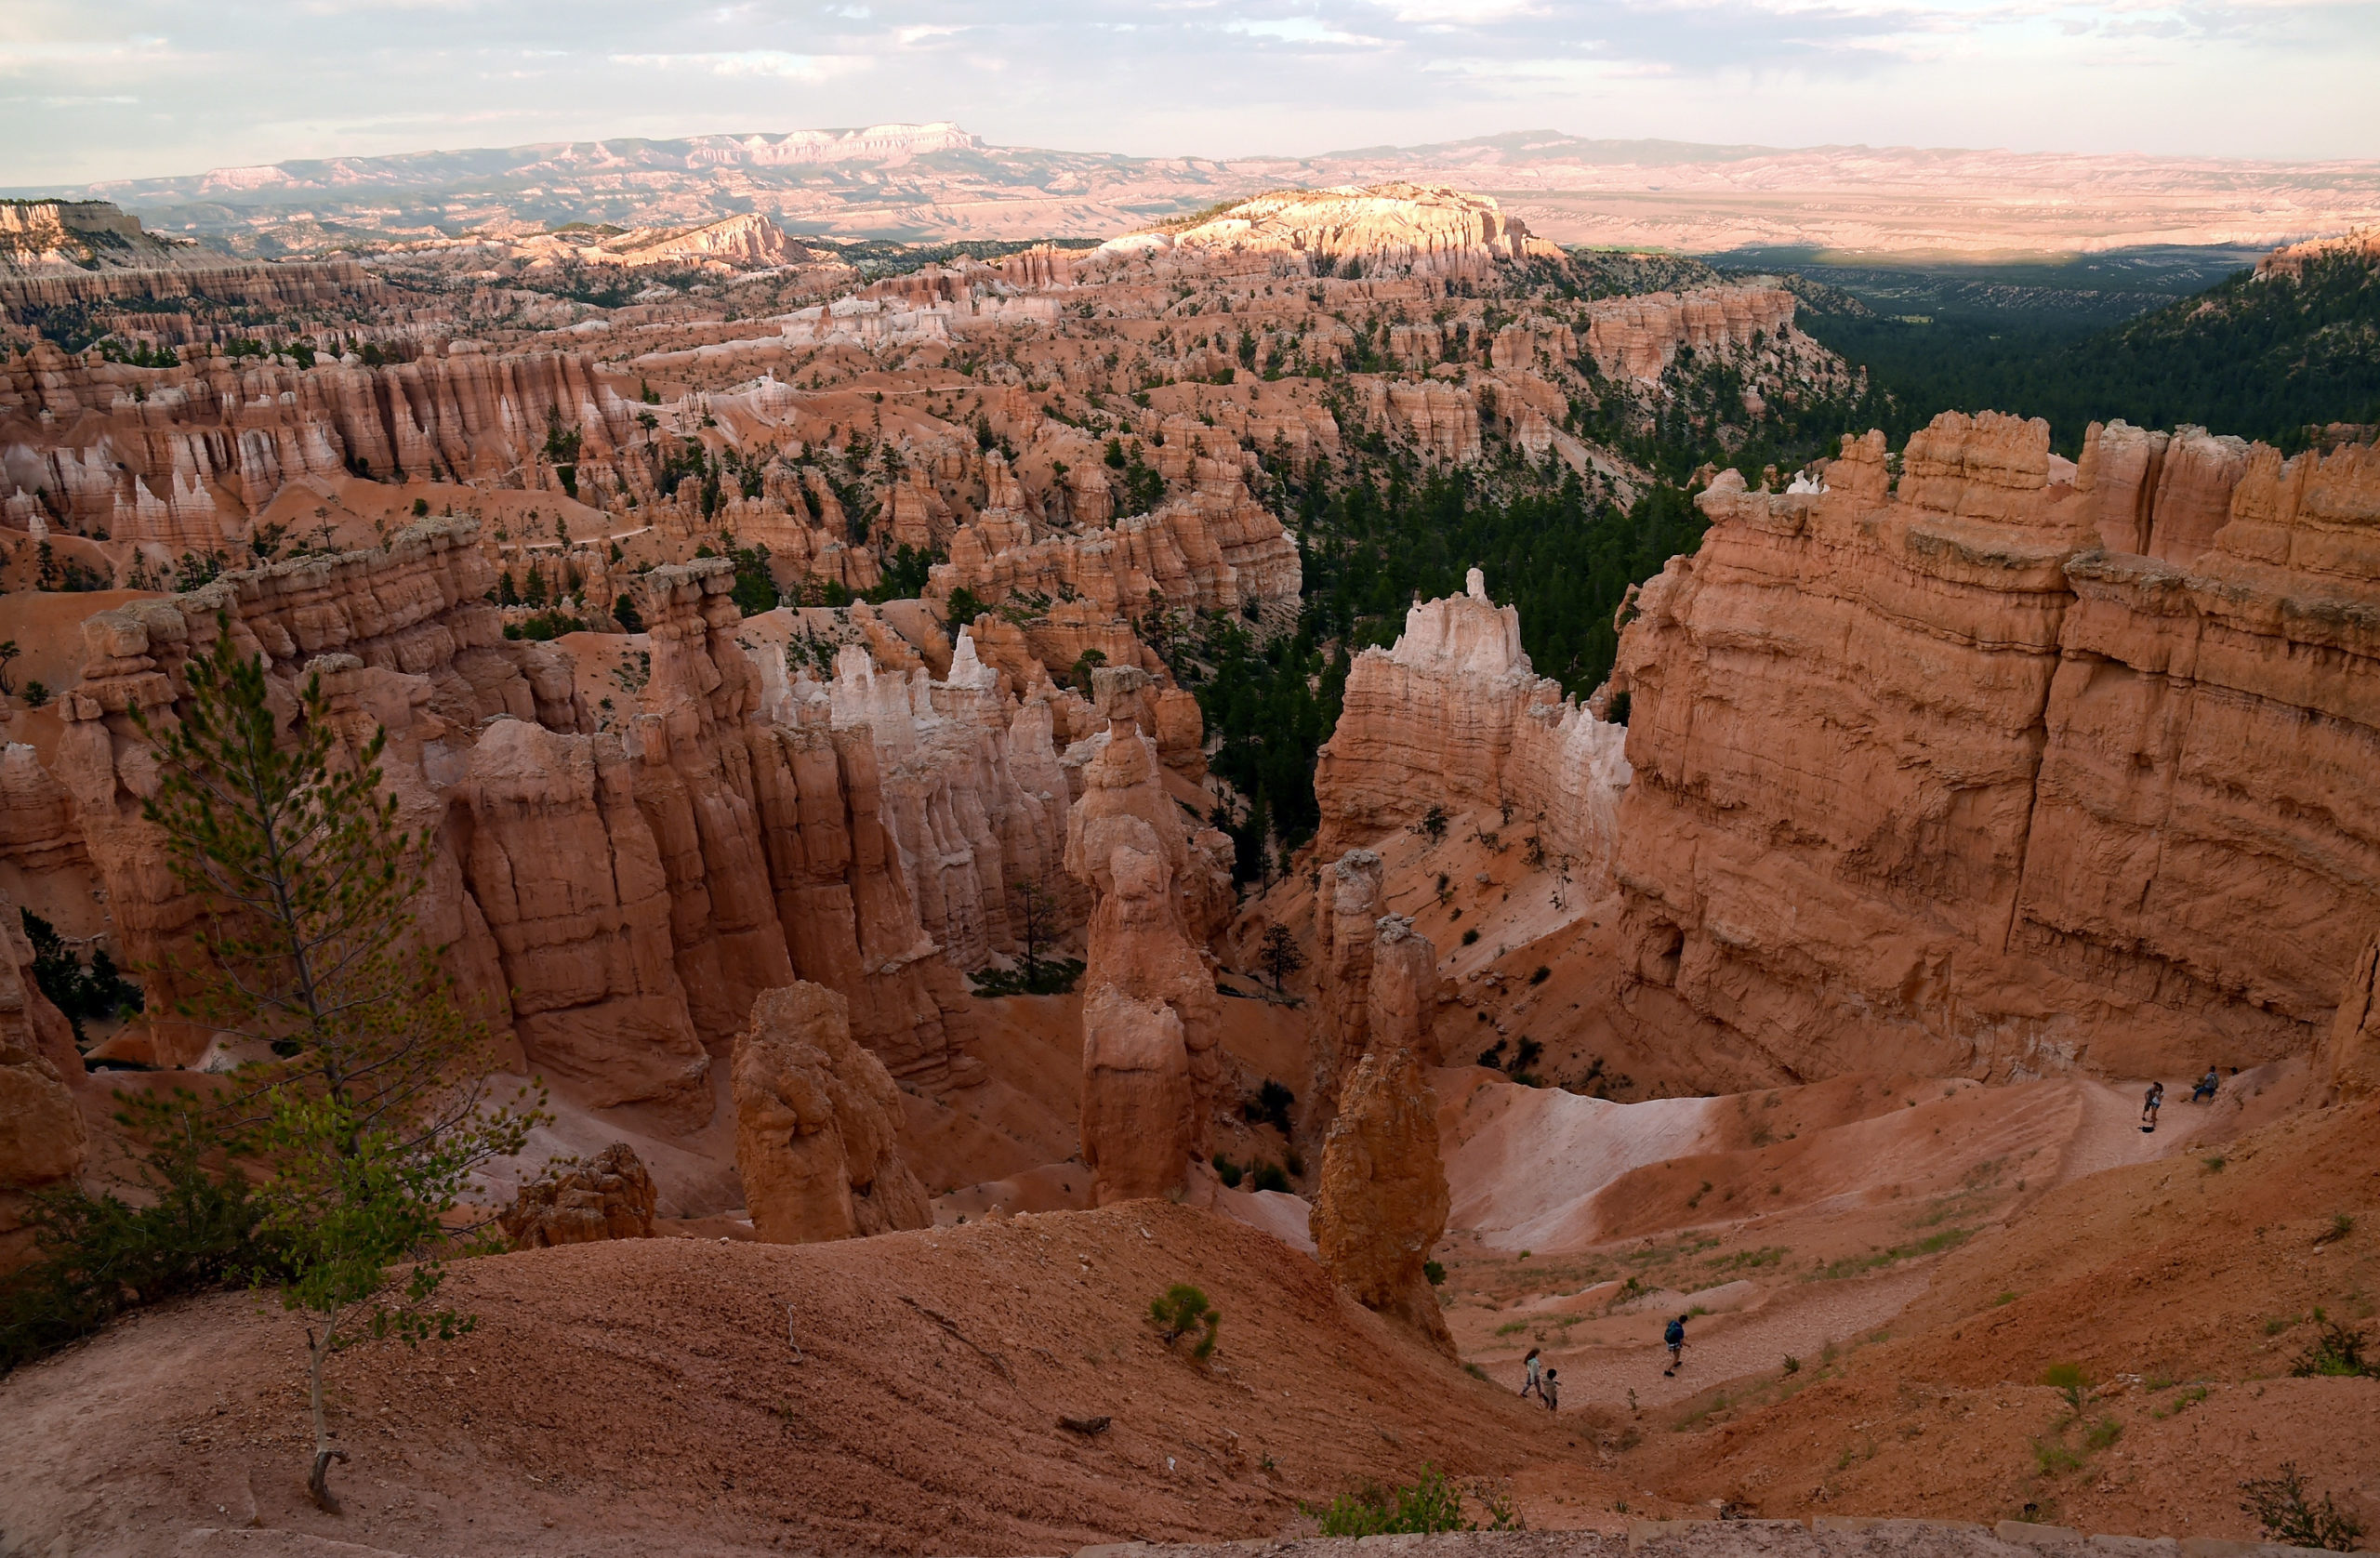 BRYCE CANYON NATIONAL PARK, UT - AUGUST 12: Visitors walk along the Navajo Loop Trail in front of hoodoos as viewed from Sunset Point overlooking Bryce Amphitheater on August 12, 2016 in Bryce Canyon National Park, Utah. (Photo by Ethan Miller/Getty Images)